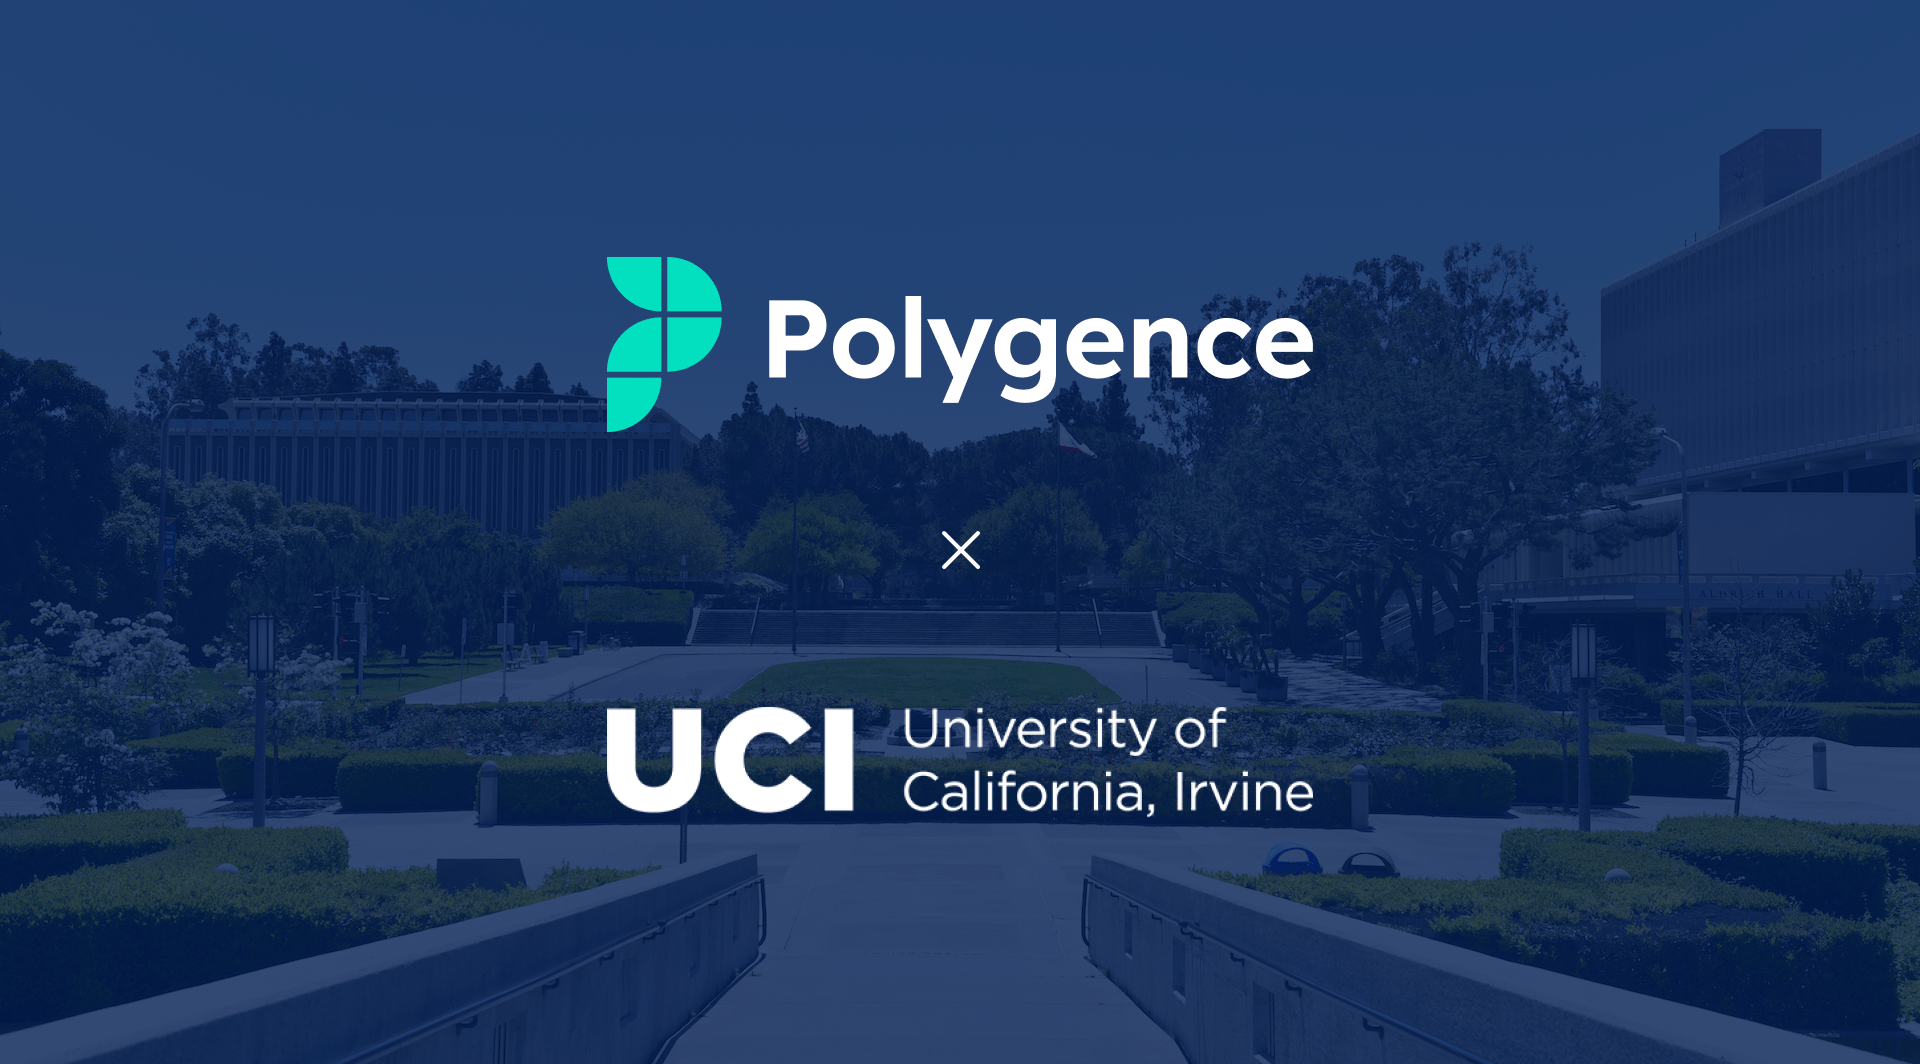 UCI campus with Polygence and UCI logos